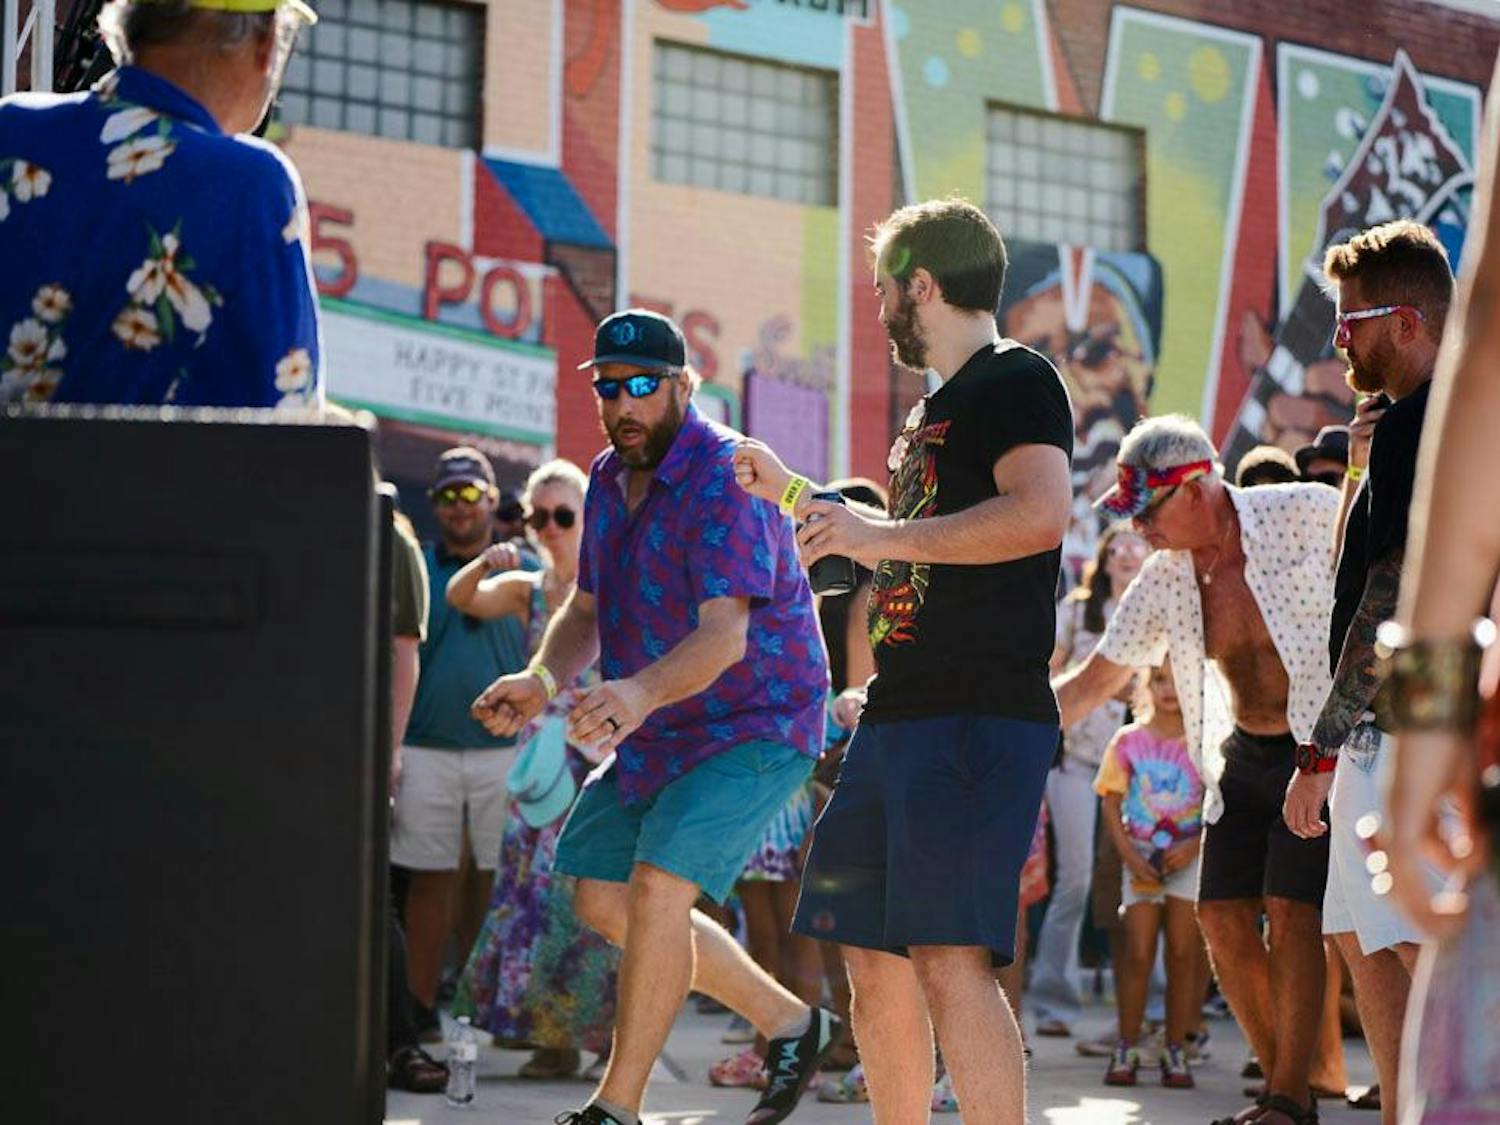 People dance to rock music played by a local band at JerryFest on Oct. 1, 2023. JerryFest honors the legacy of Jerry Garcia, the late lead guitarist and vocalist of Grateful Dead.